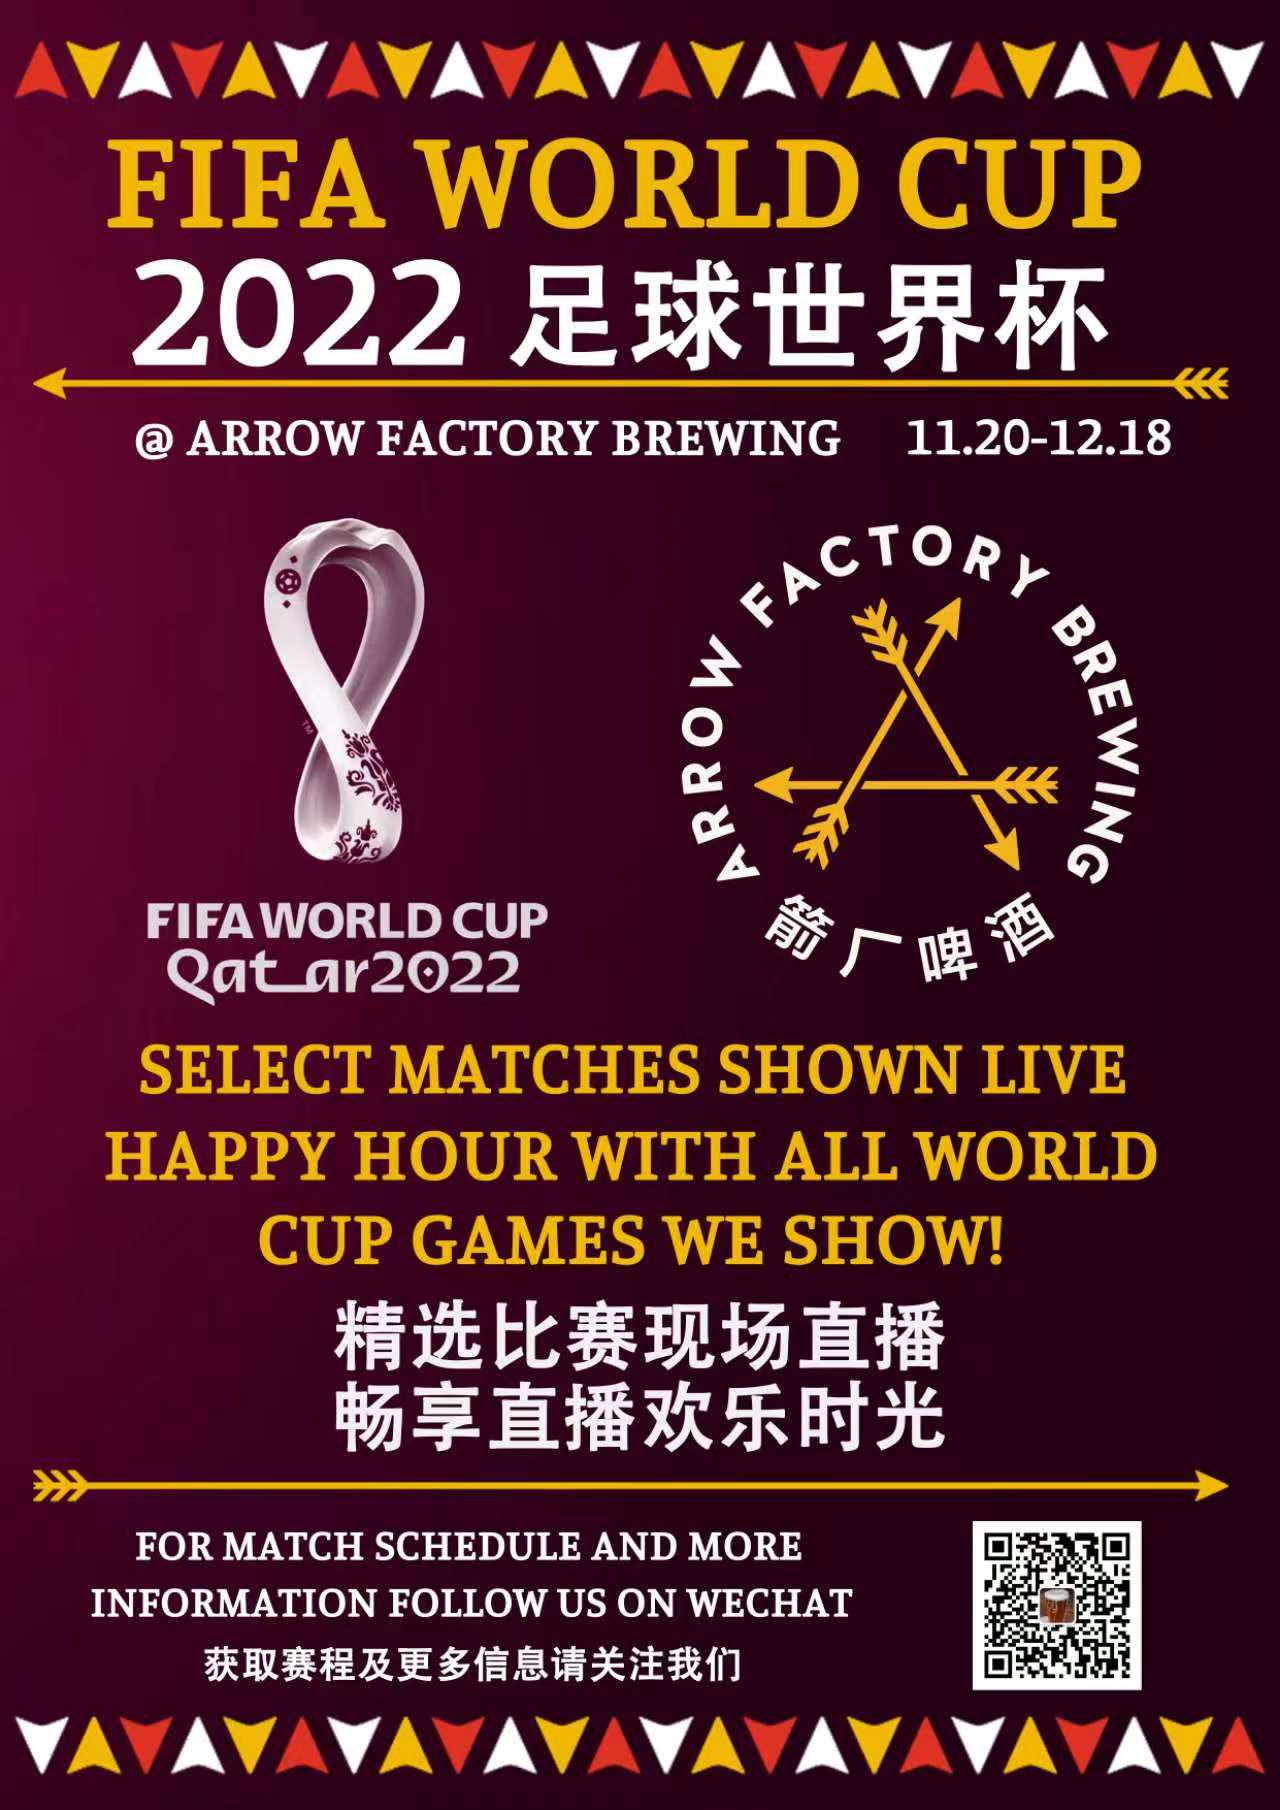 FIFA World Cup 2022 at Arrow Factory the Beijinger